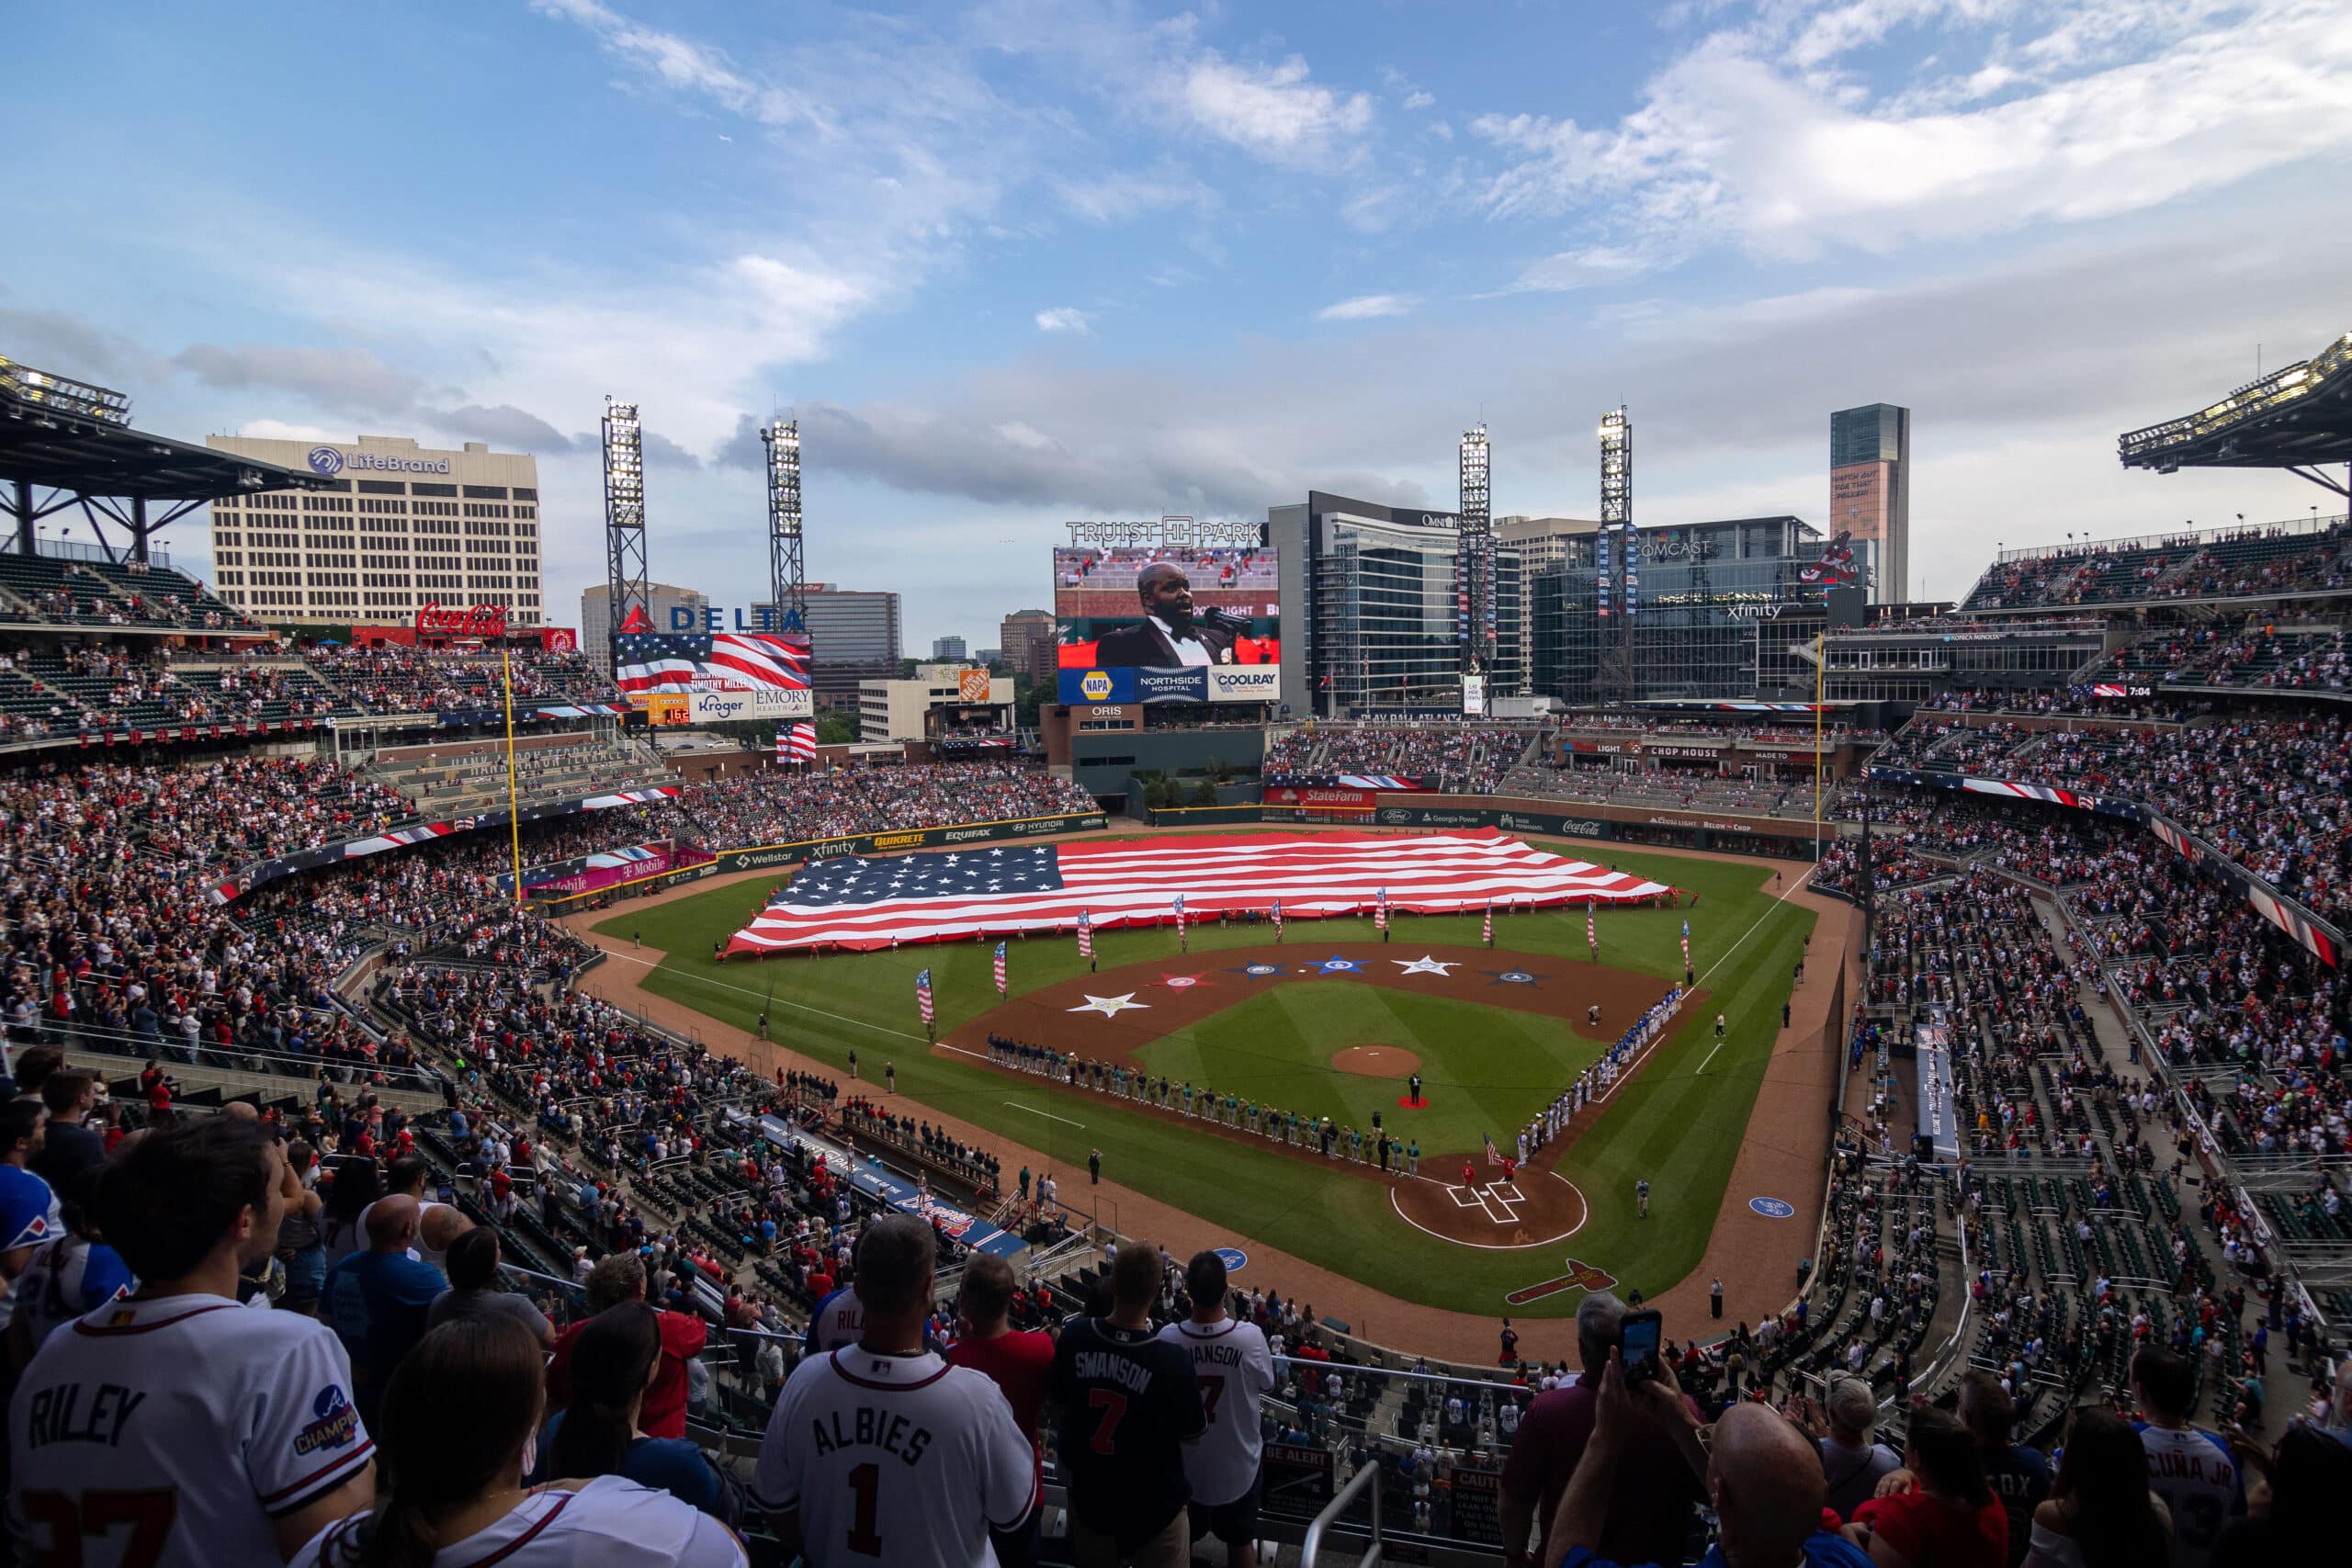 Braves merchandise at Truist Park in 2023, Here's what's new